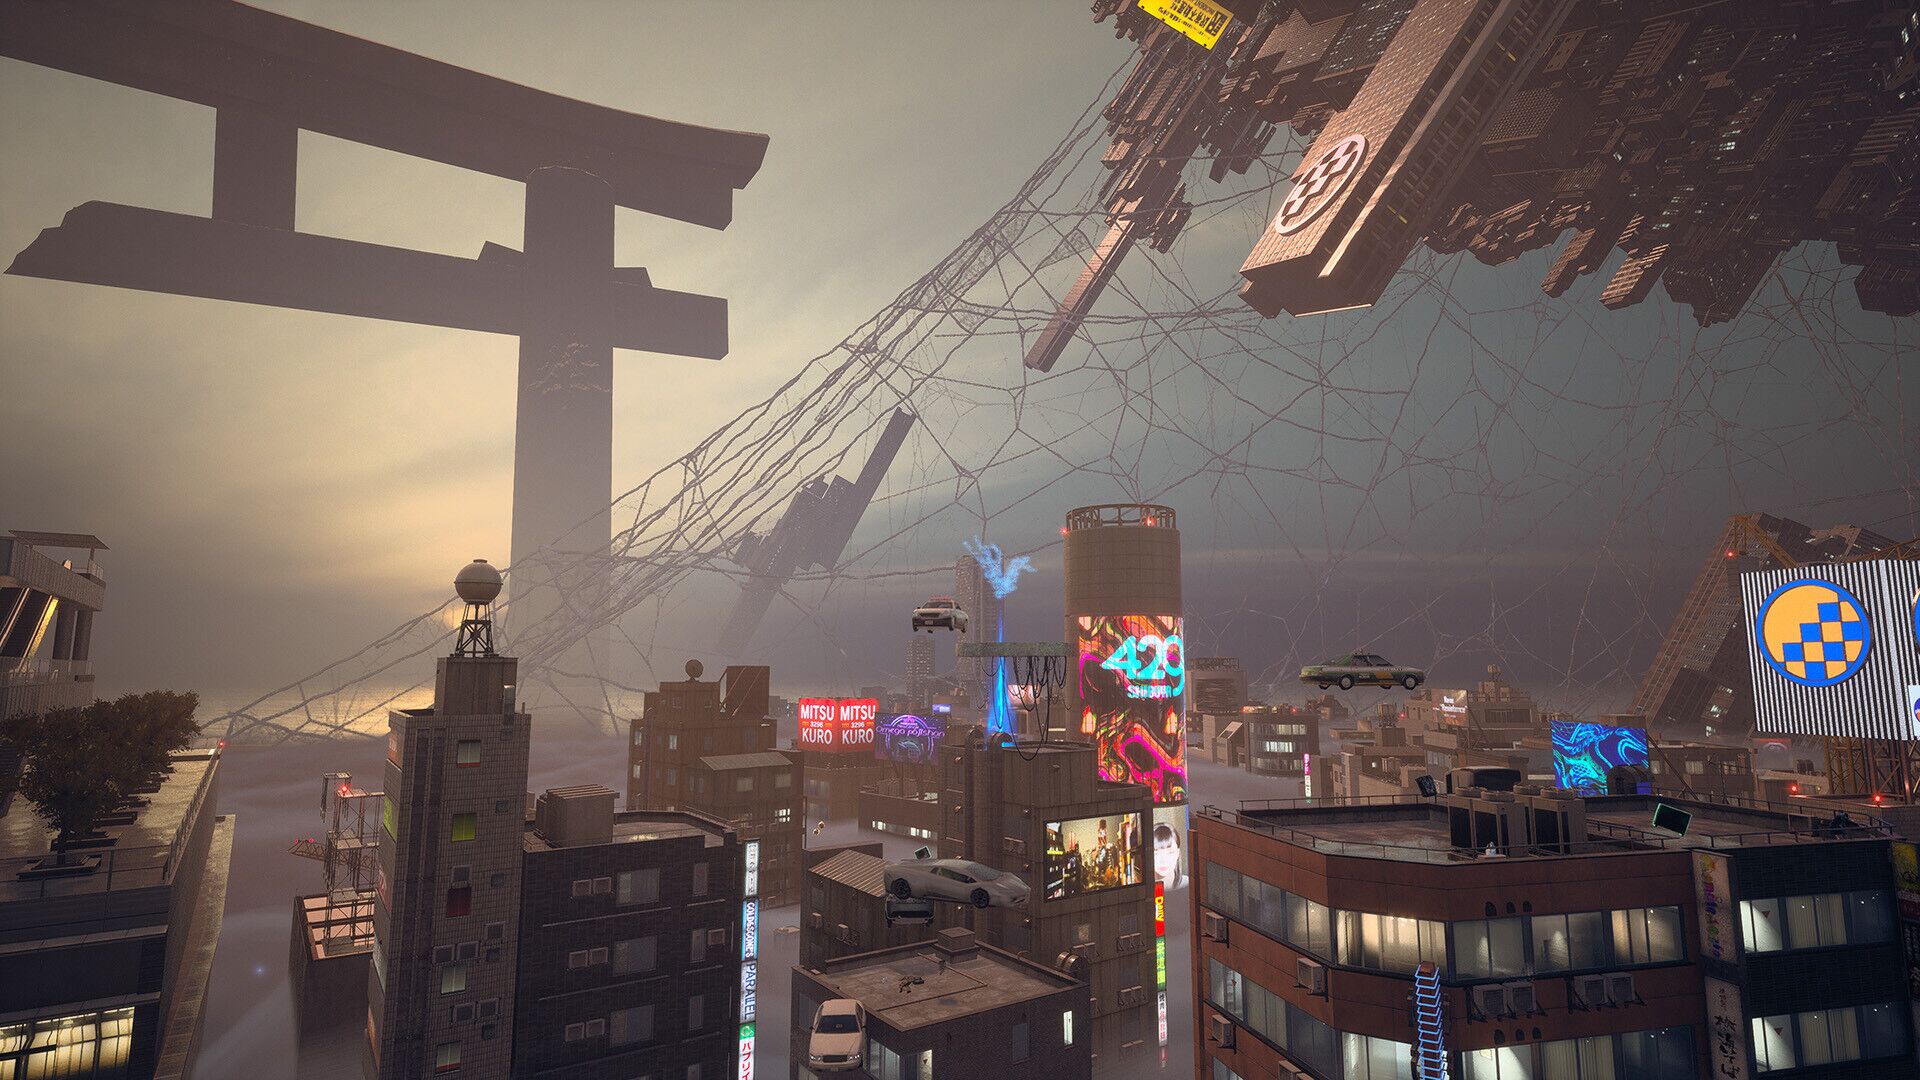 Ghostwire: Tokyo Features One Of The Best Renditions Of The Japanese City | Image Source: Steam